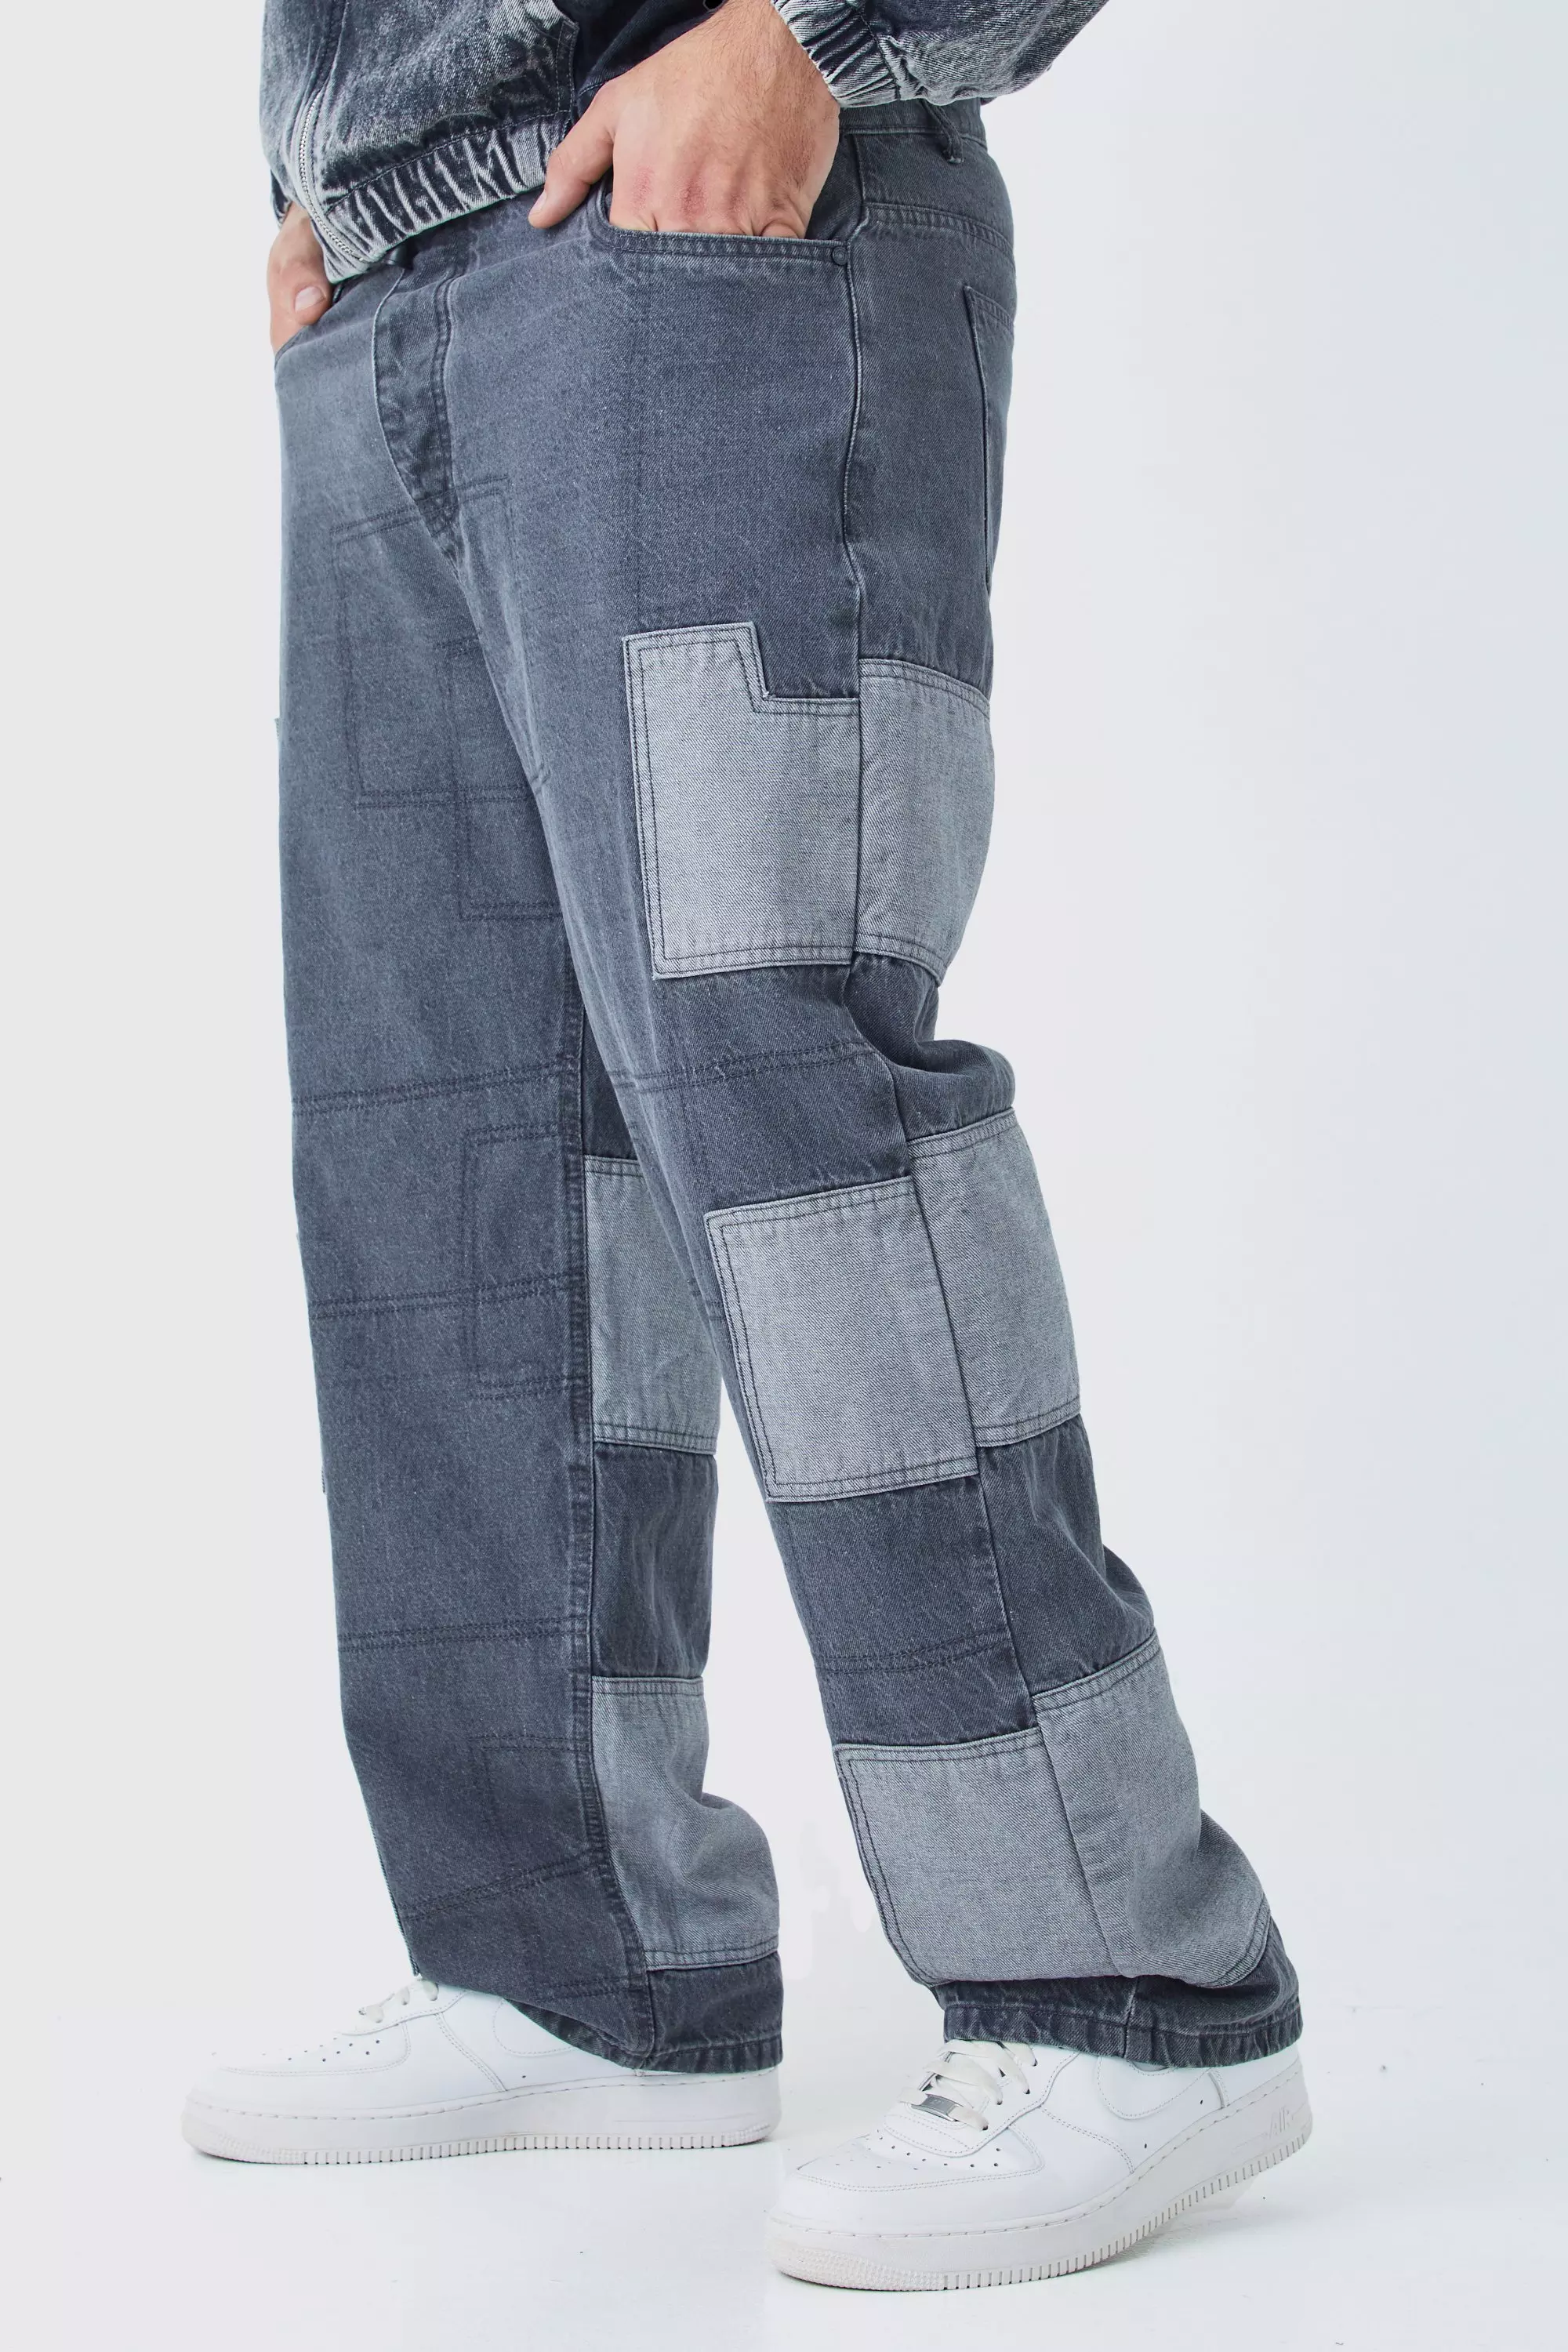 Buy Patchwork Cargo Pocket Stretch Twill Pant Men's Jeans & Pants from  Buyers Picks. Find Buyers Picks fashion & more at